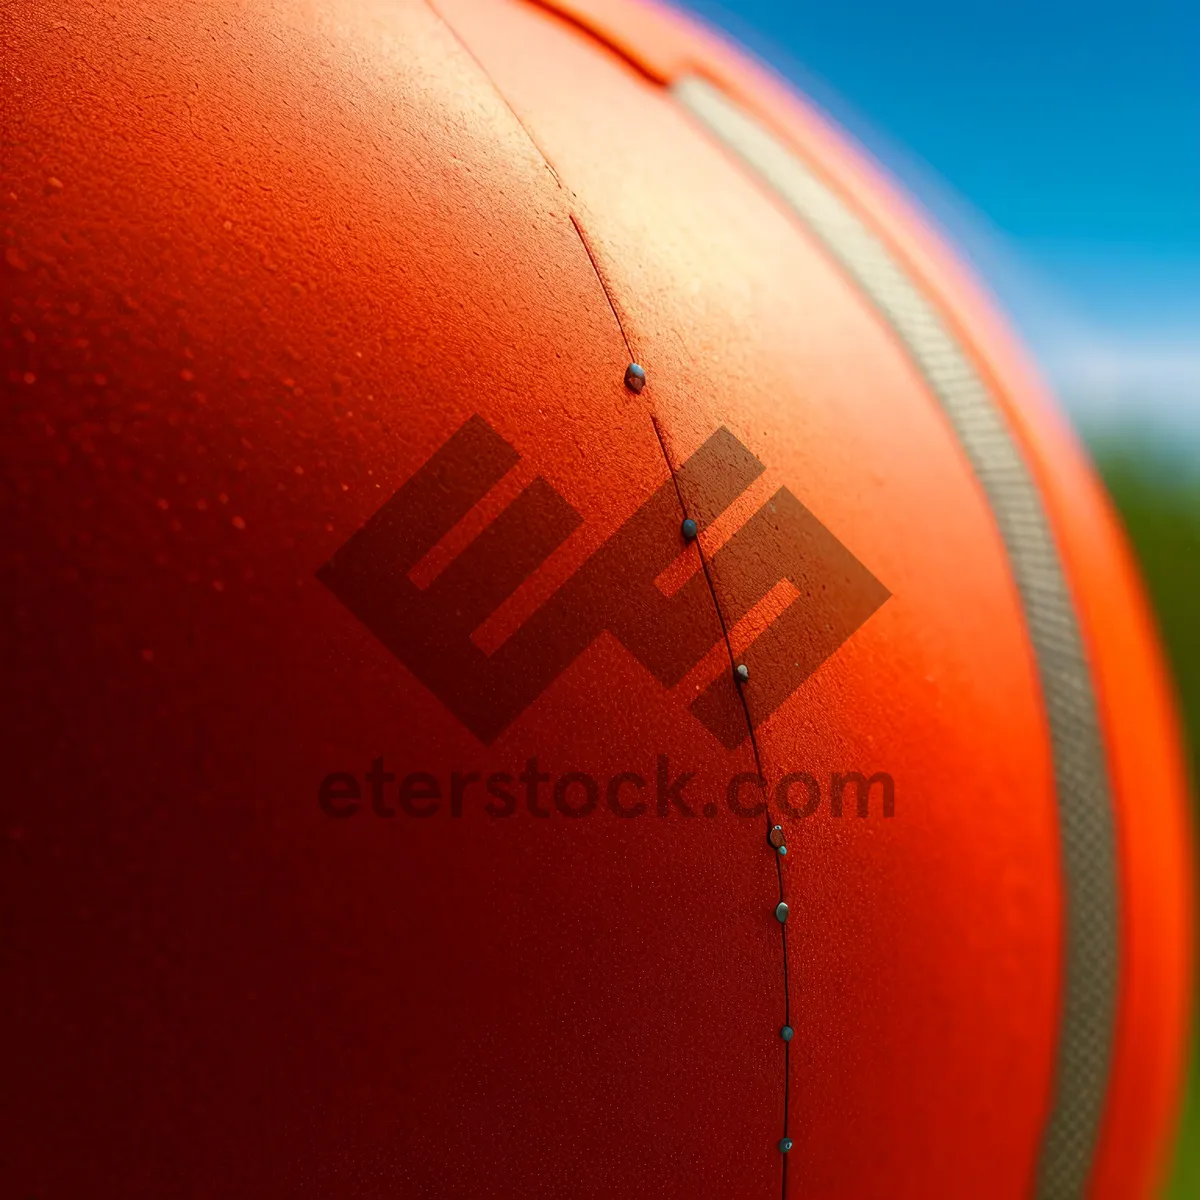 Picture of Sunlit Orange Sphere Balloon in Sports Competition